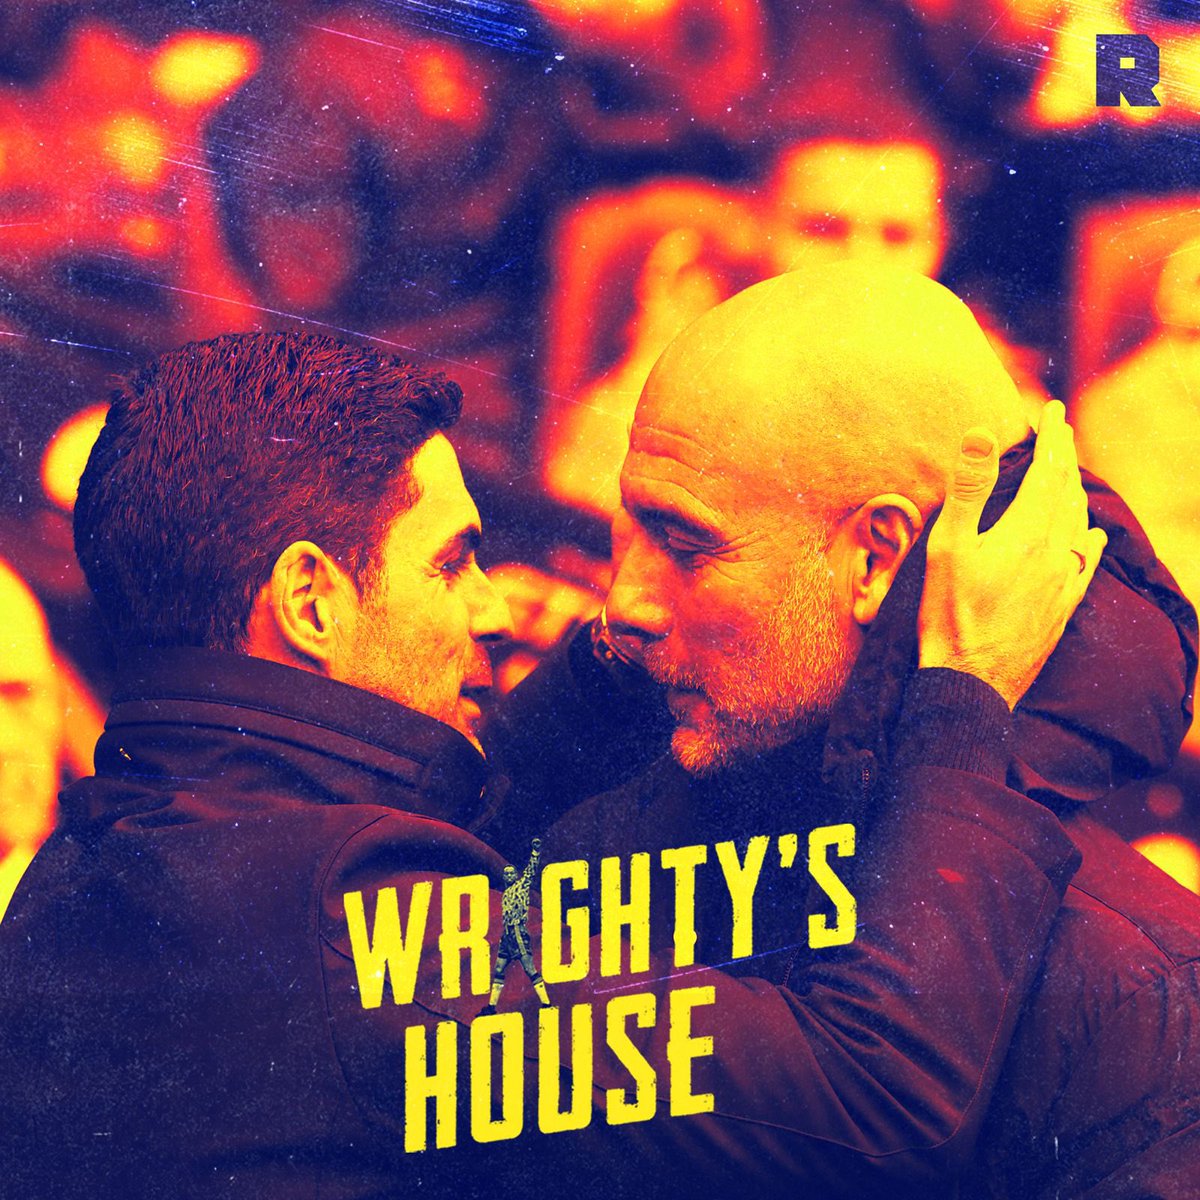 New episode on @ringerpodcasts! @IanWright0 is joined by @clivepafc and @Okwonga: - Manchester City and Arsenal share the points - Liverpool’s win over Brighton - and more! open.spotify.com/episode/6gIQst…